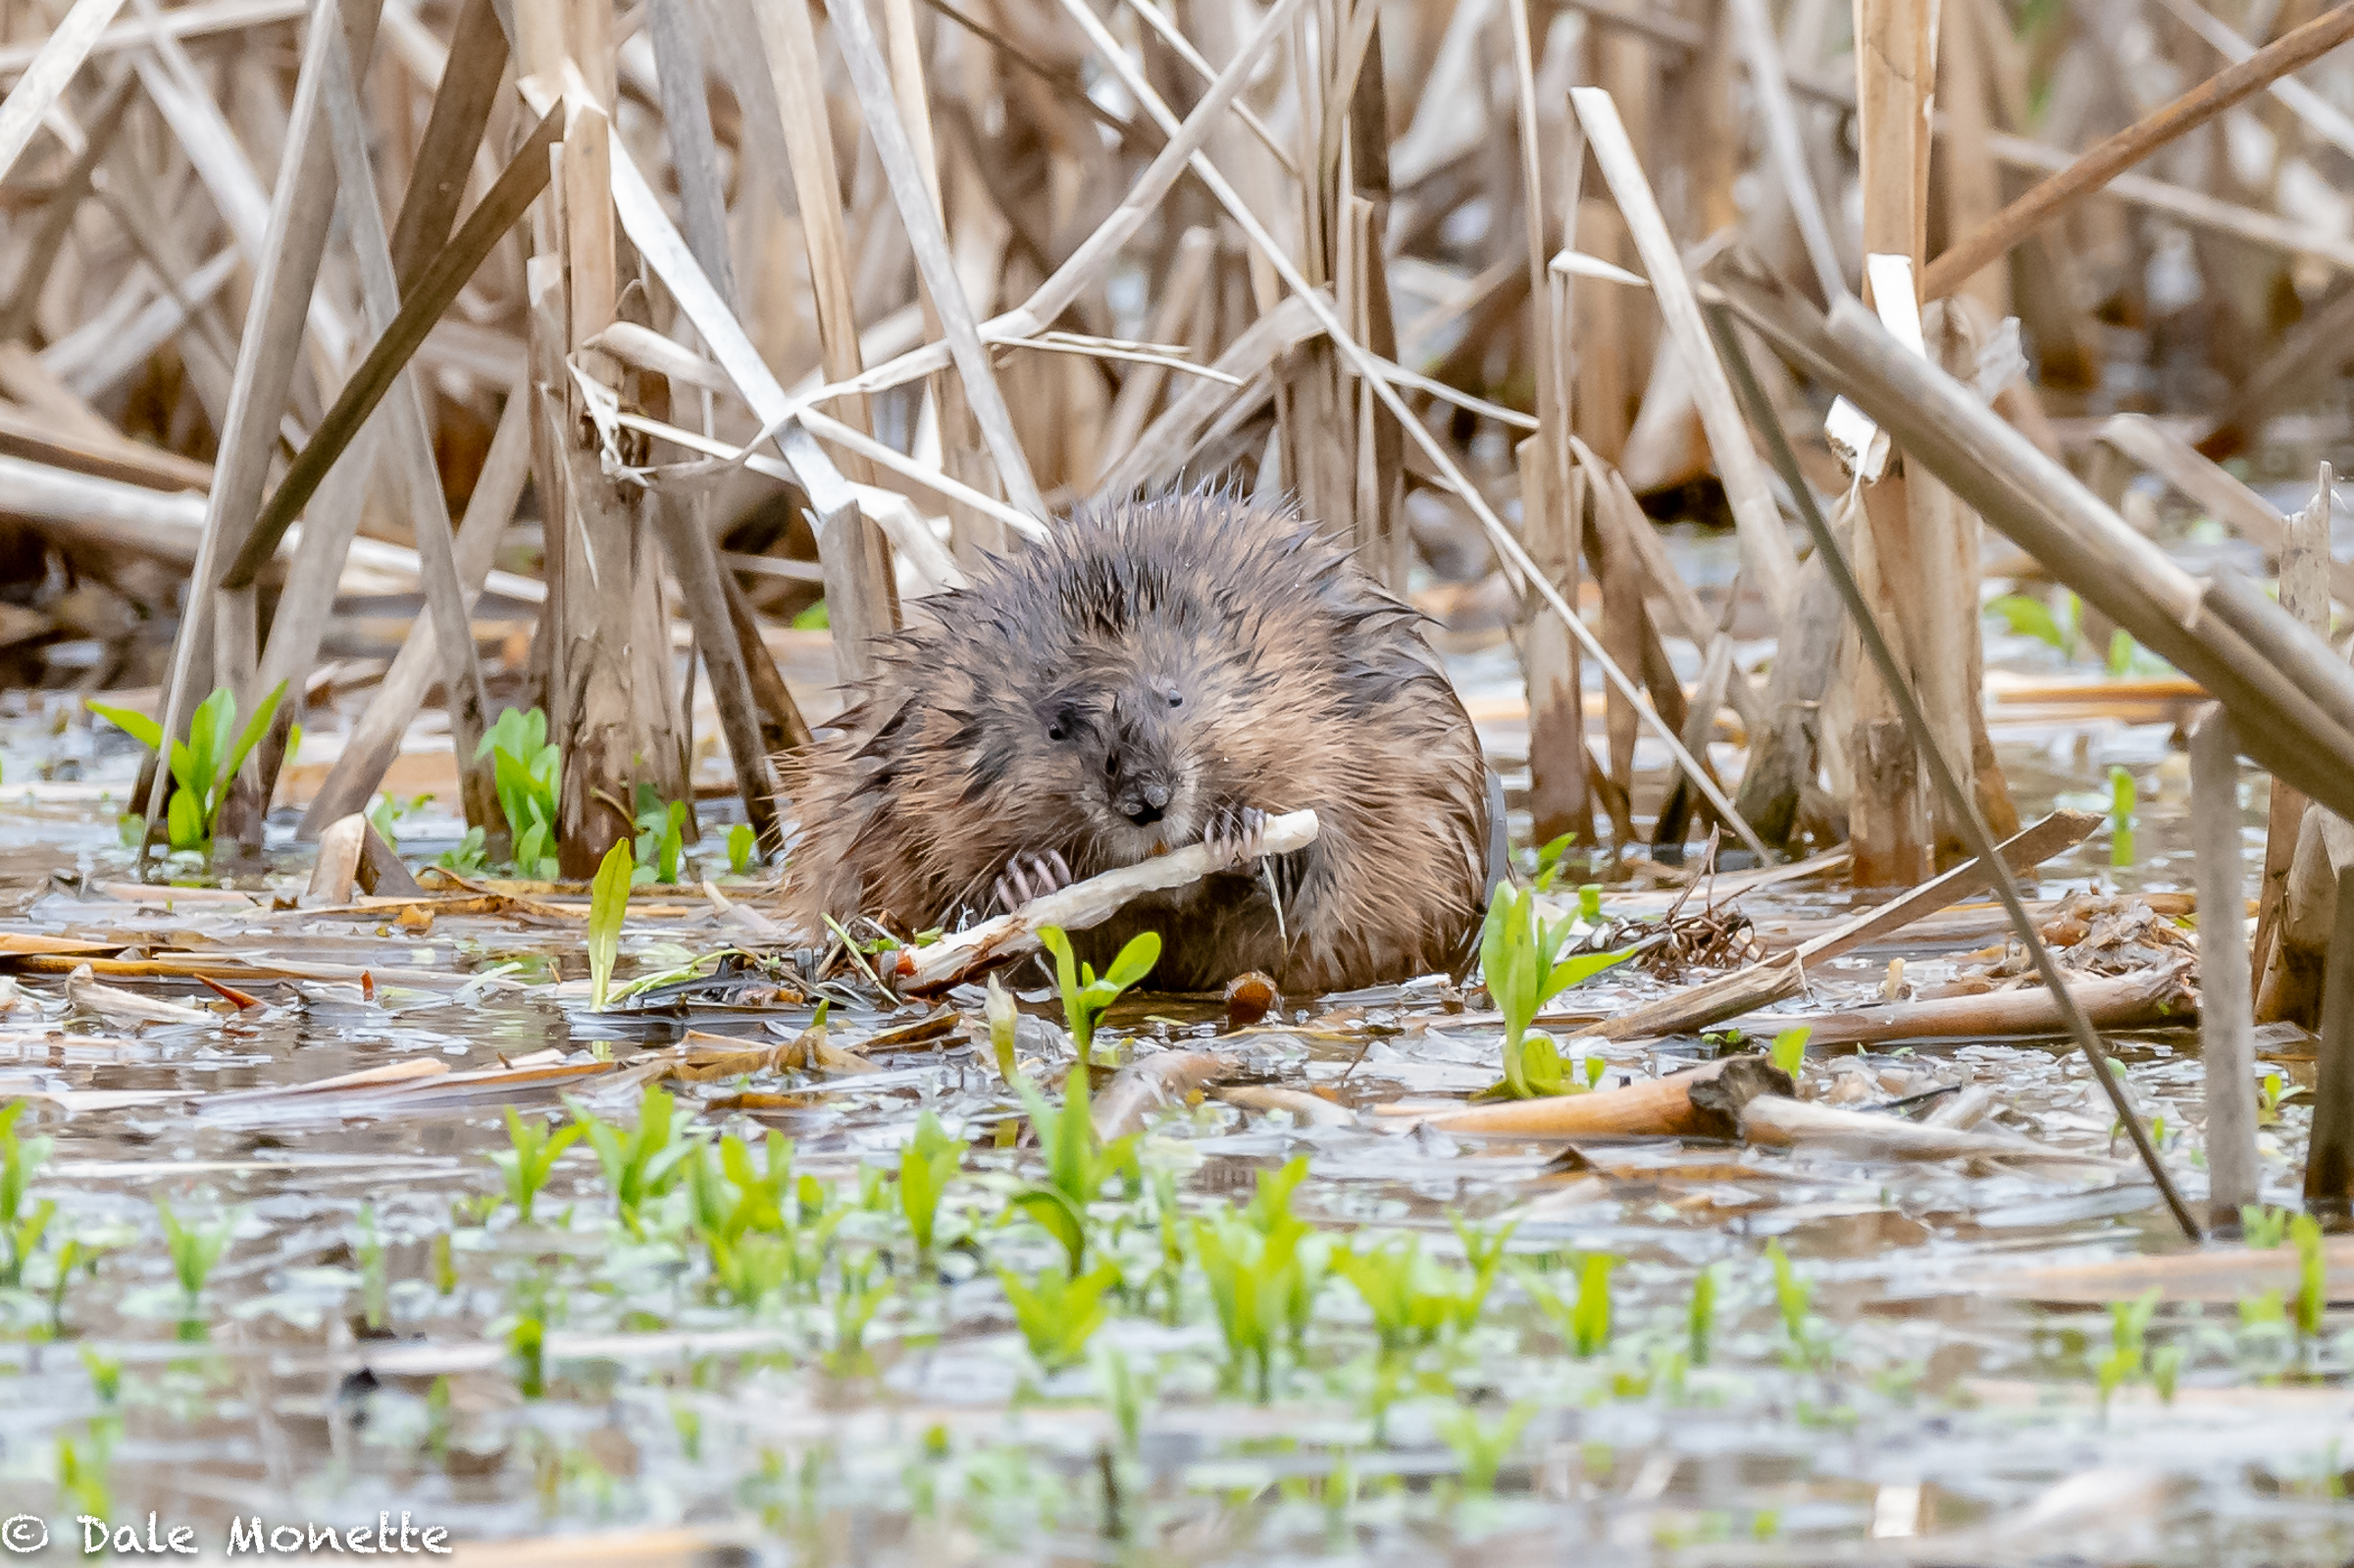   I watched this muskrat feeding in a small pond this morning. I was amazed to see how much it ate. I kept checking on it to see if it had stopped which it did after 2 hours.  